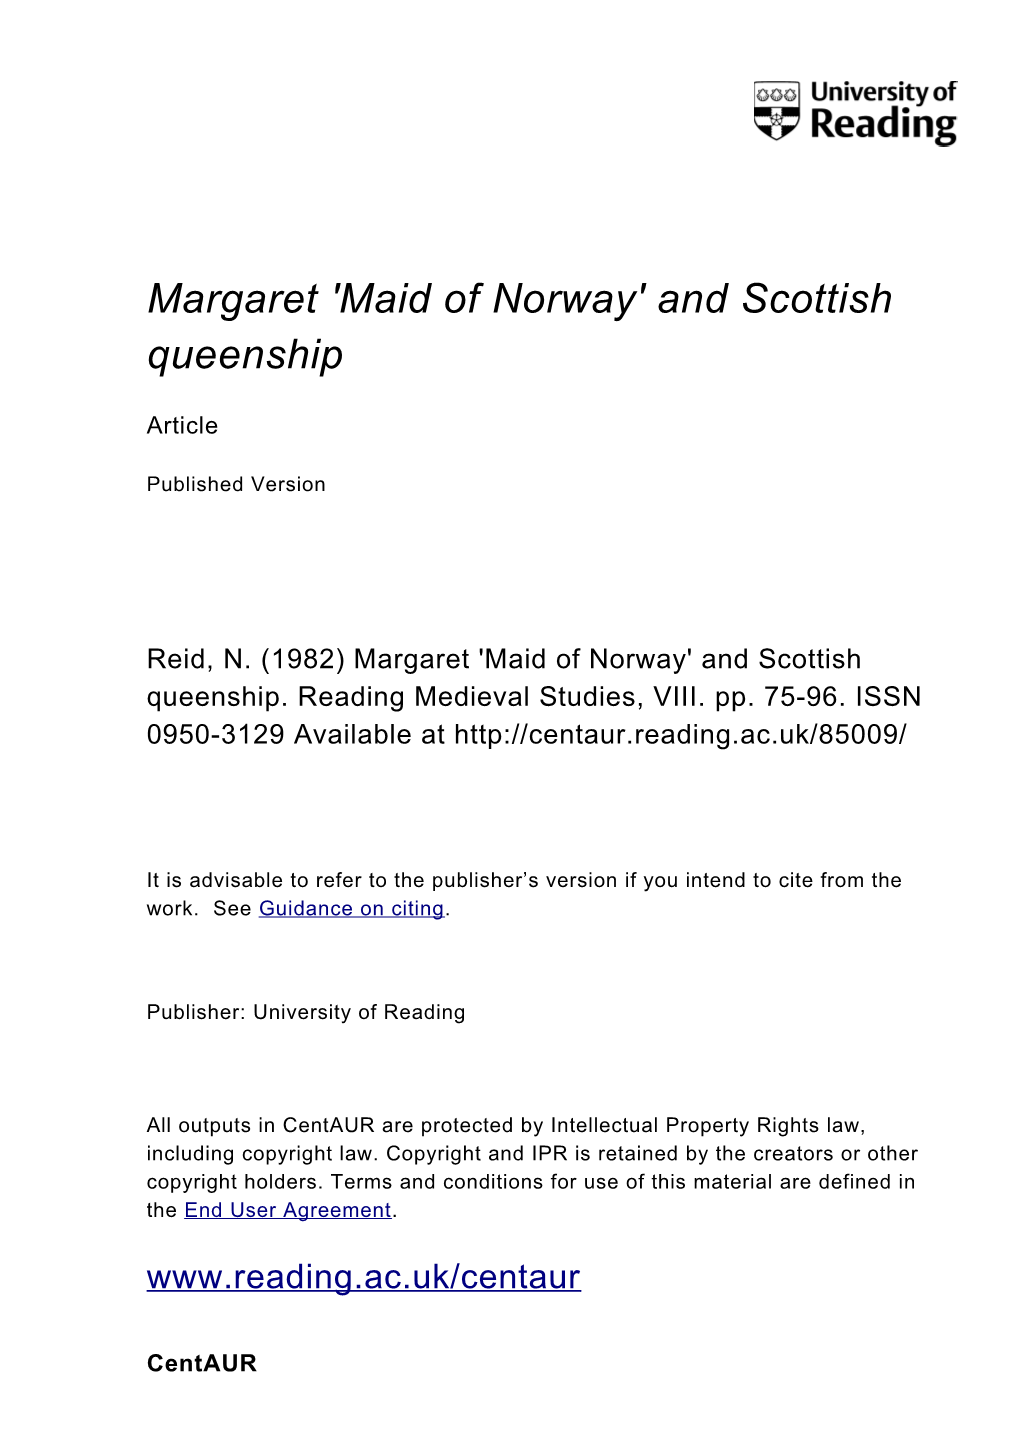 Margaret 'Maid of Norway' and Scottish Queenship